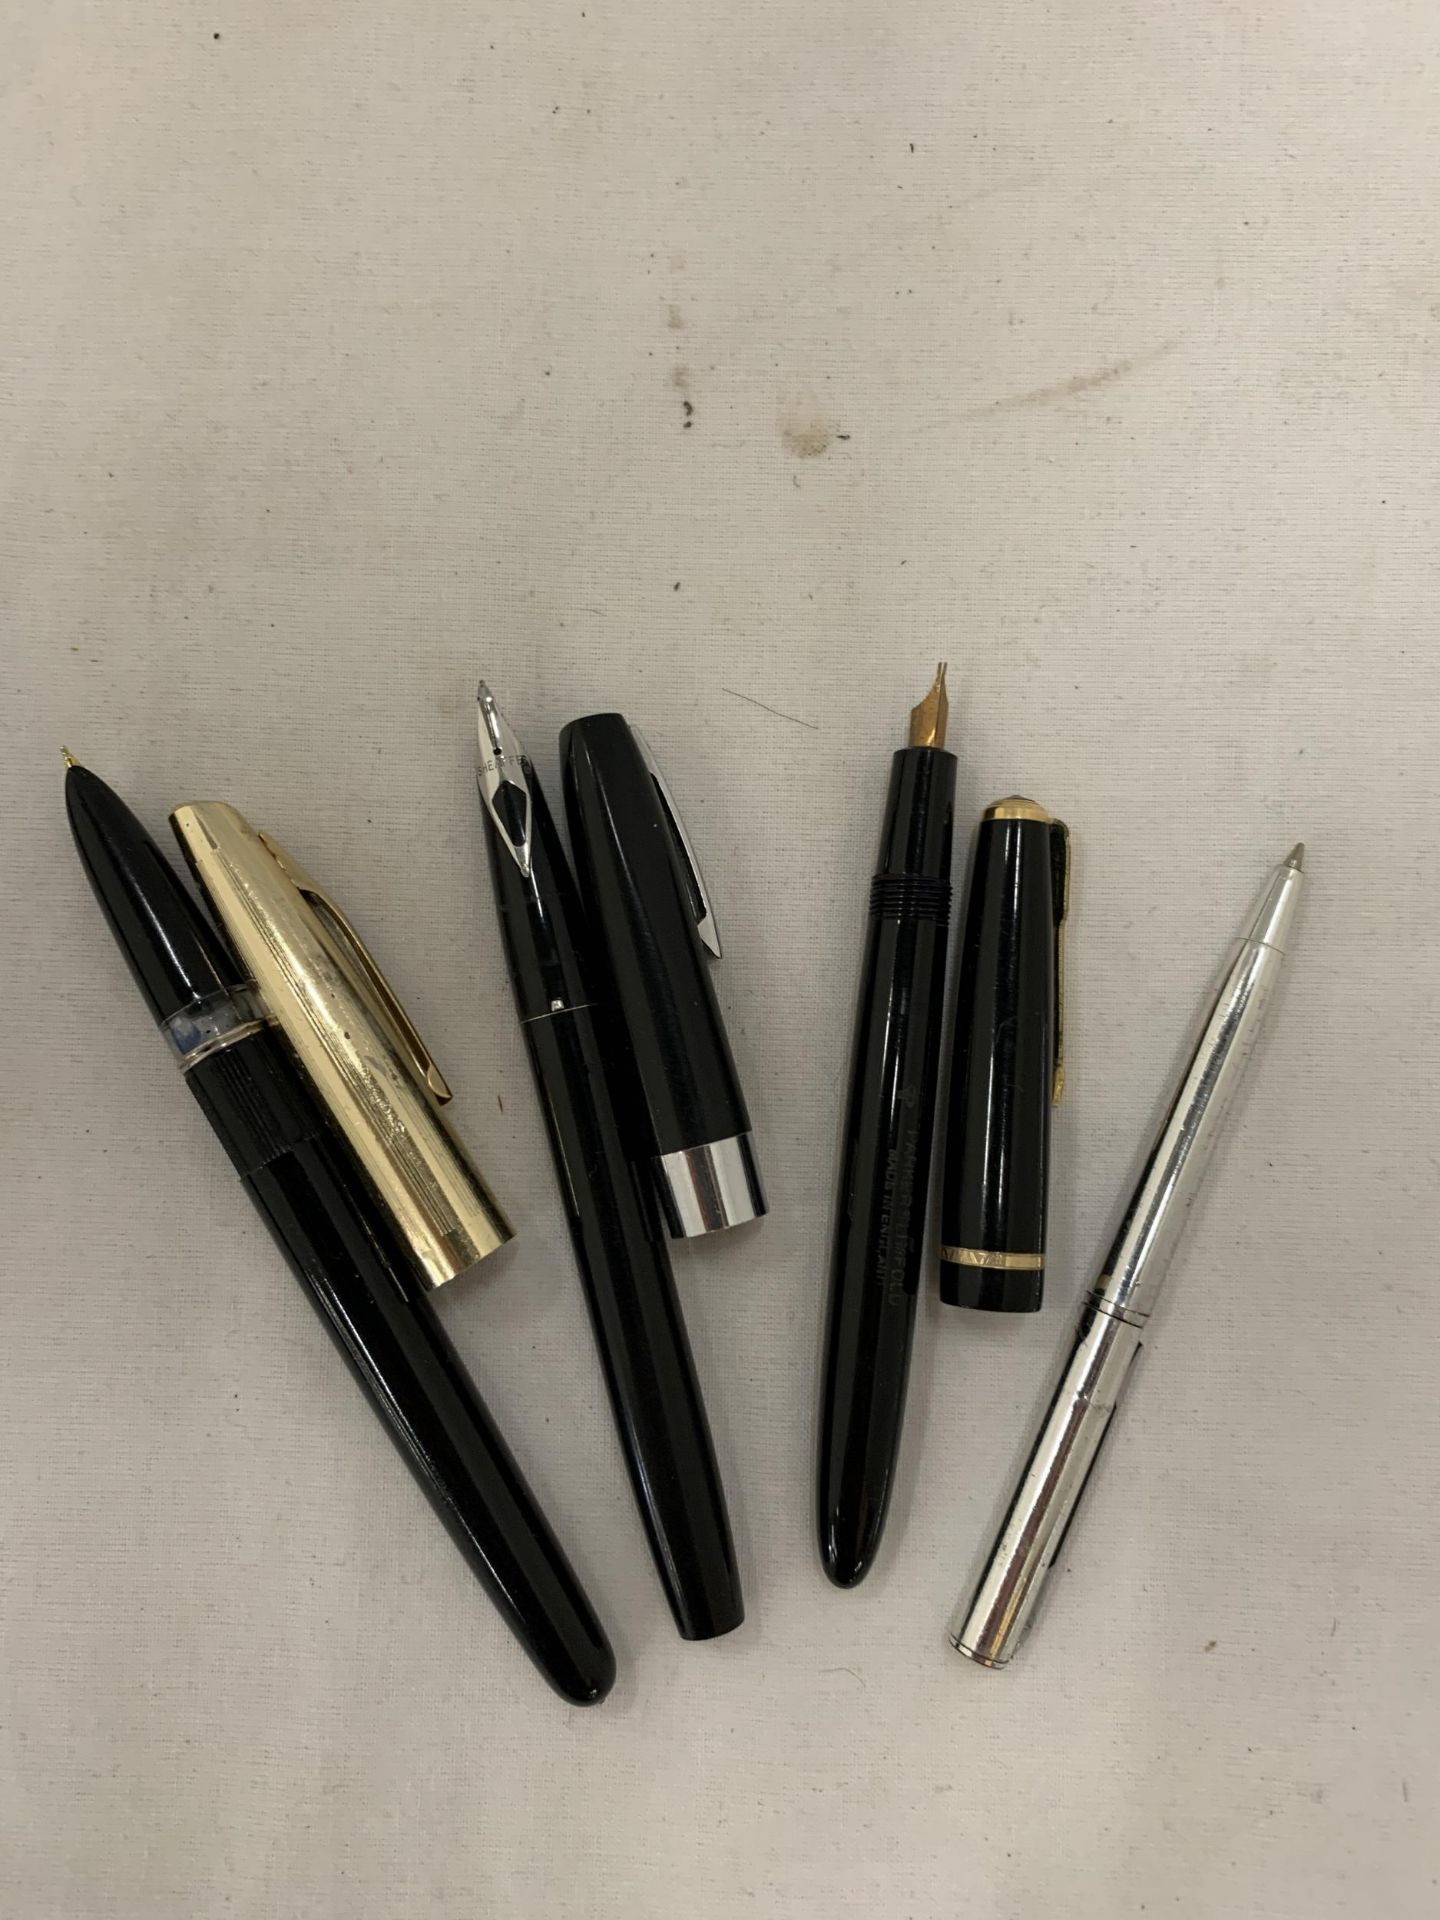 FOUR PENS TO INCLUDE TWO CARTRIDGE, A FOUNTAIN AND BALL POINT - Image 2 of 3